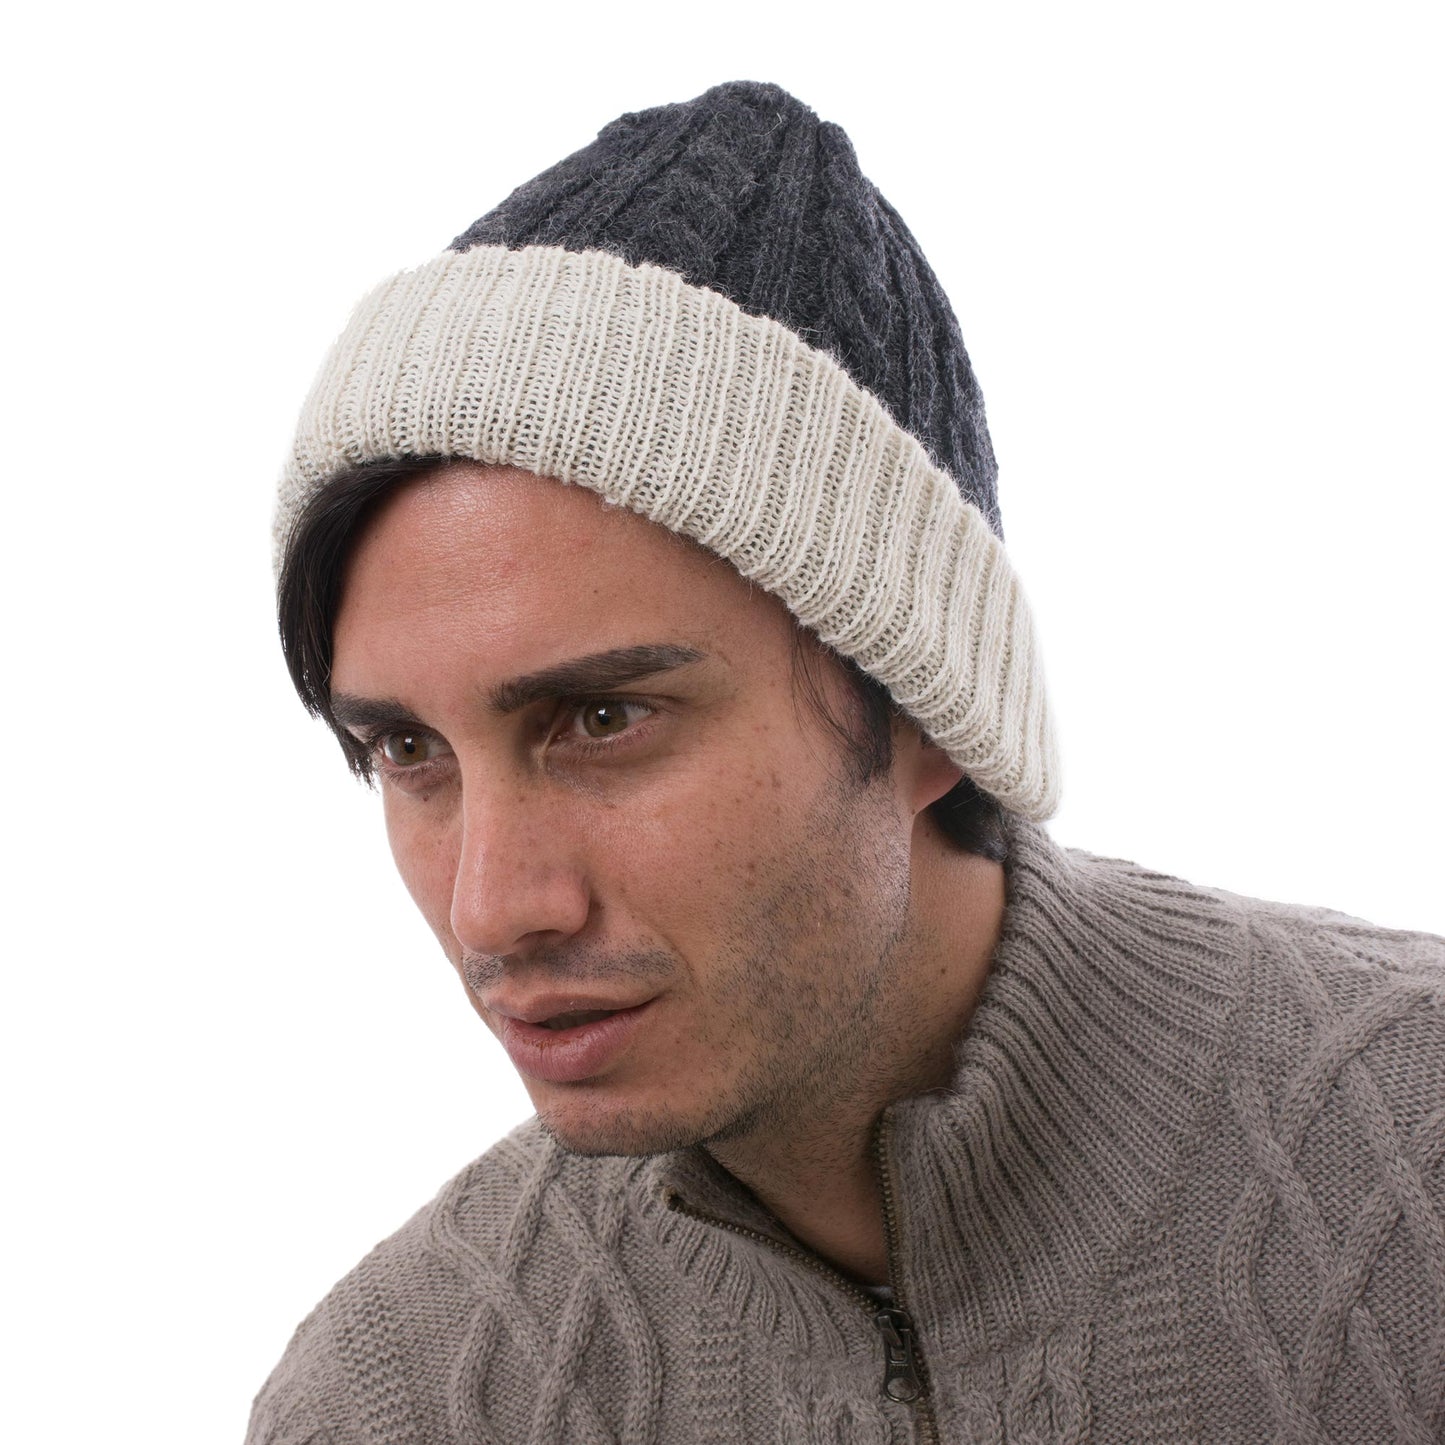 Warm and Contented 100% Alpaca White and Grey Reversible Knit Hat from Peru